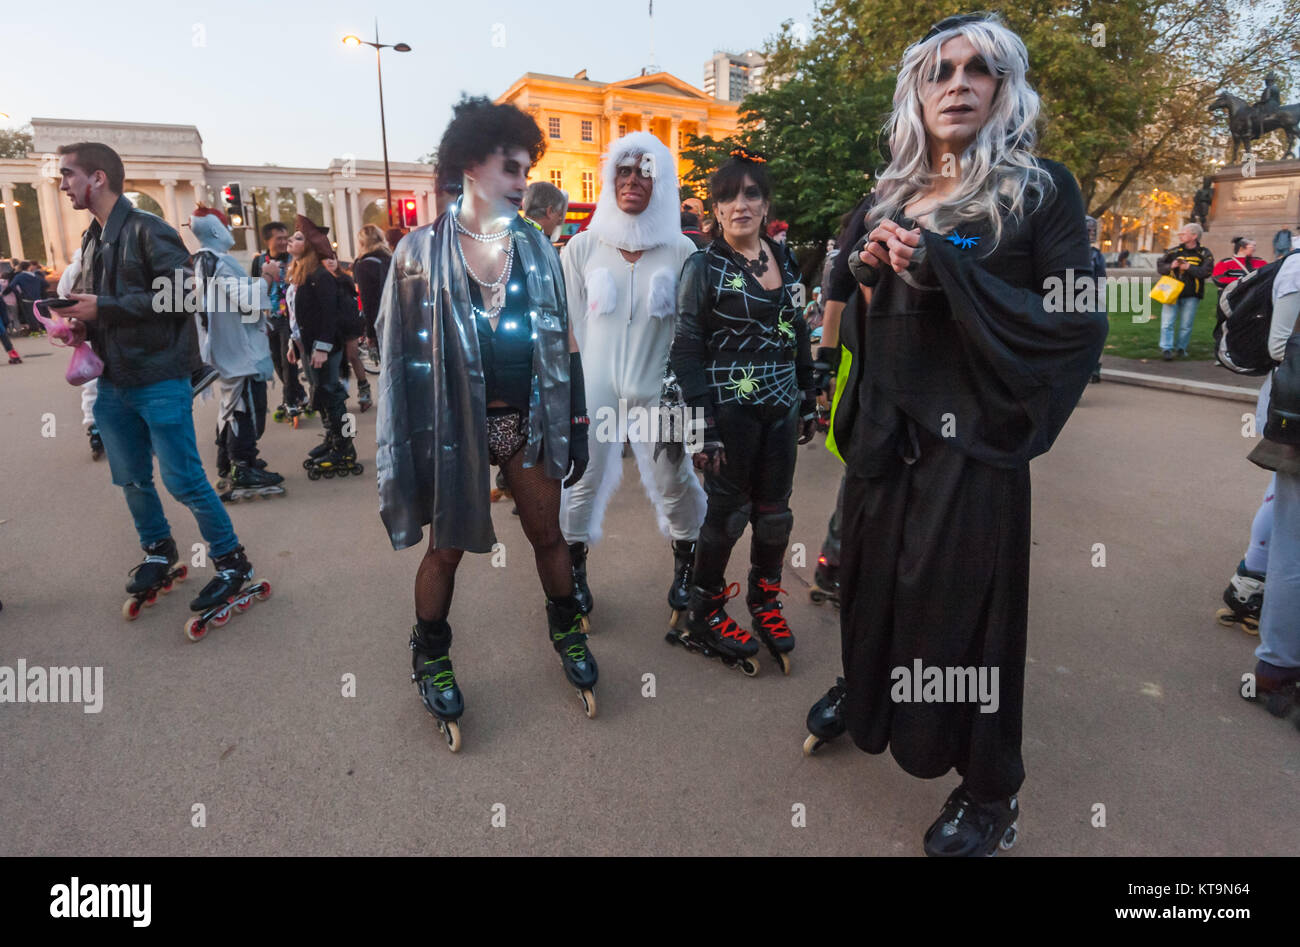 London Friday Night Skate gathered at Hyde Park for their annual Halloween  skate in a wide range of Halloween costumes before leaving to skate on a  lengthy route through Mayfair, Soho, Covent